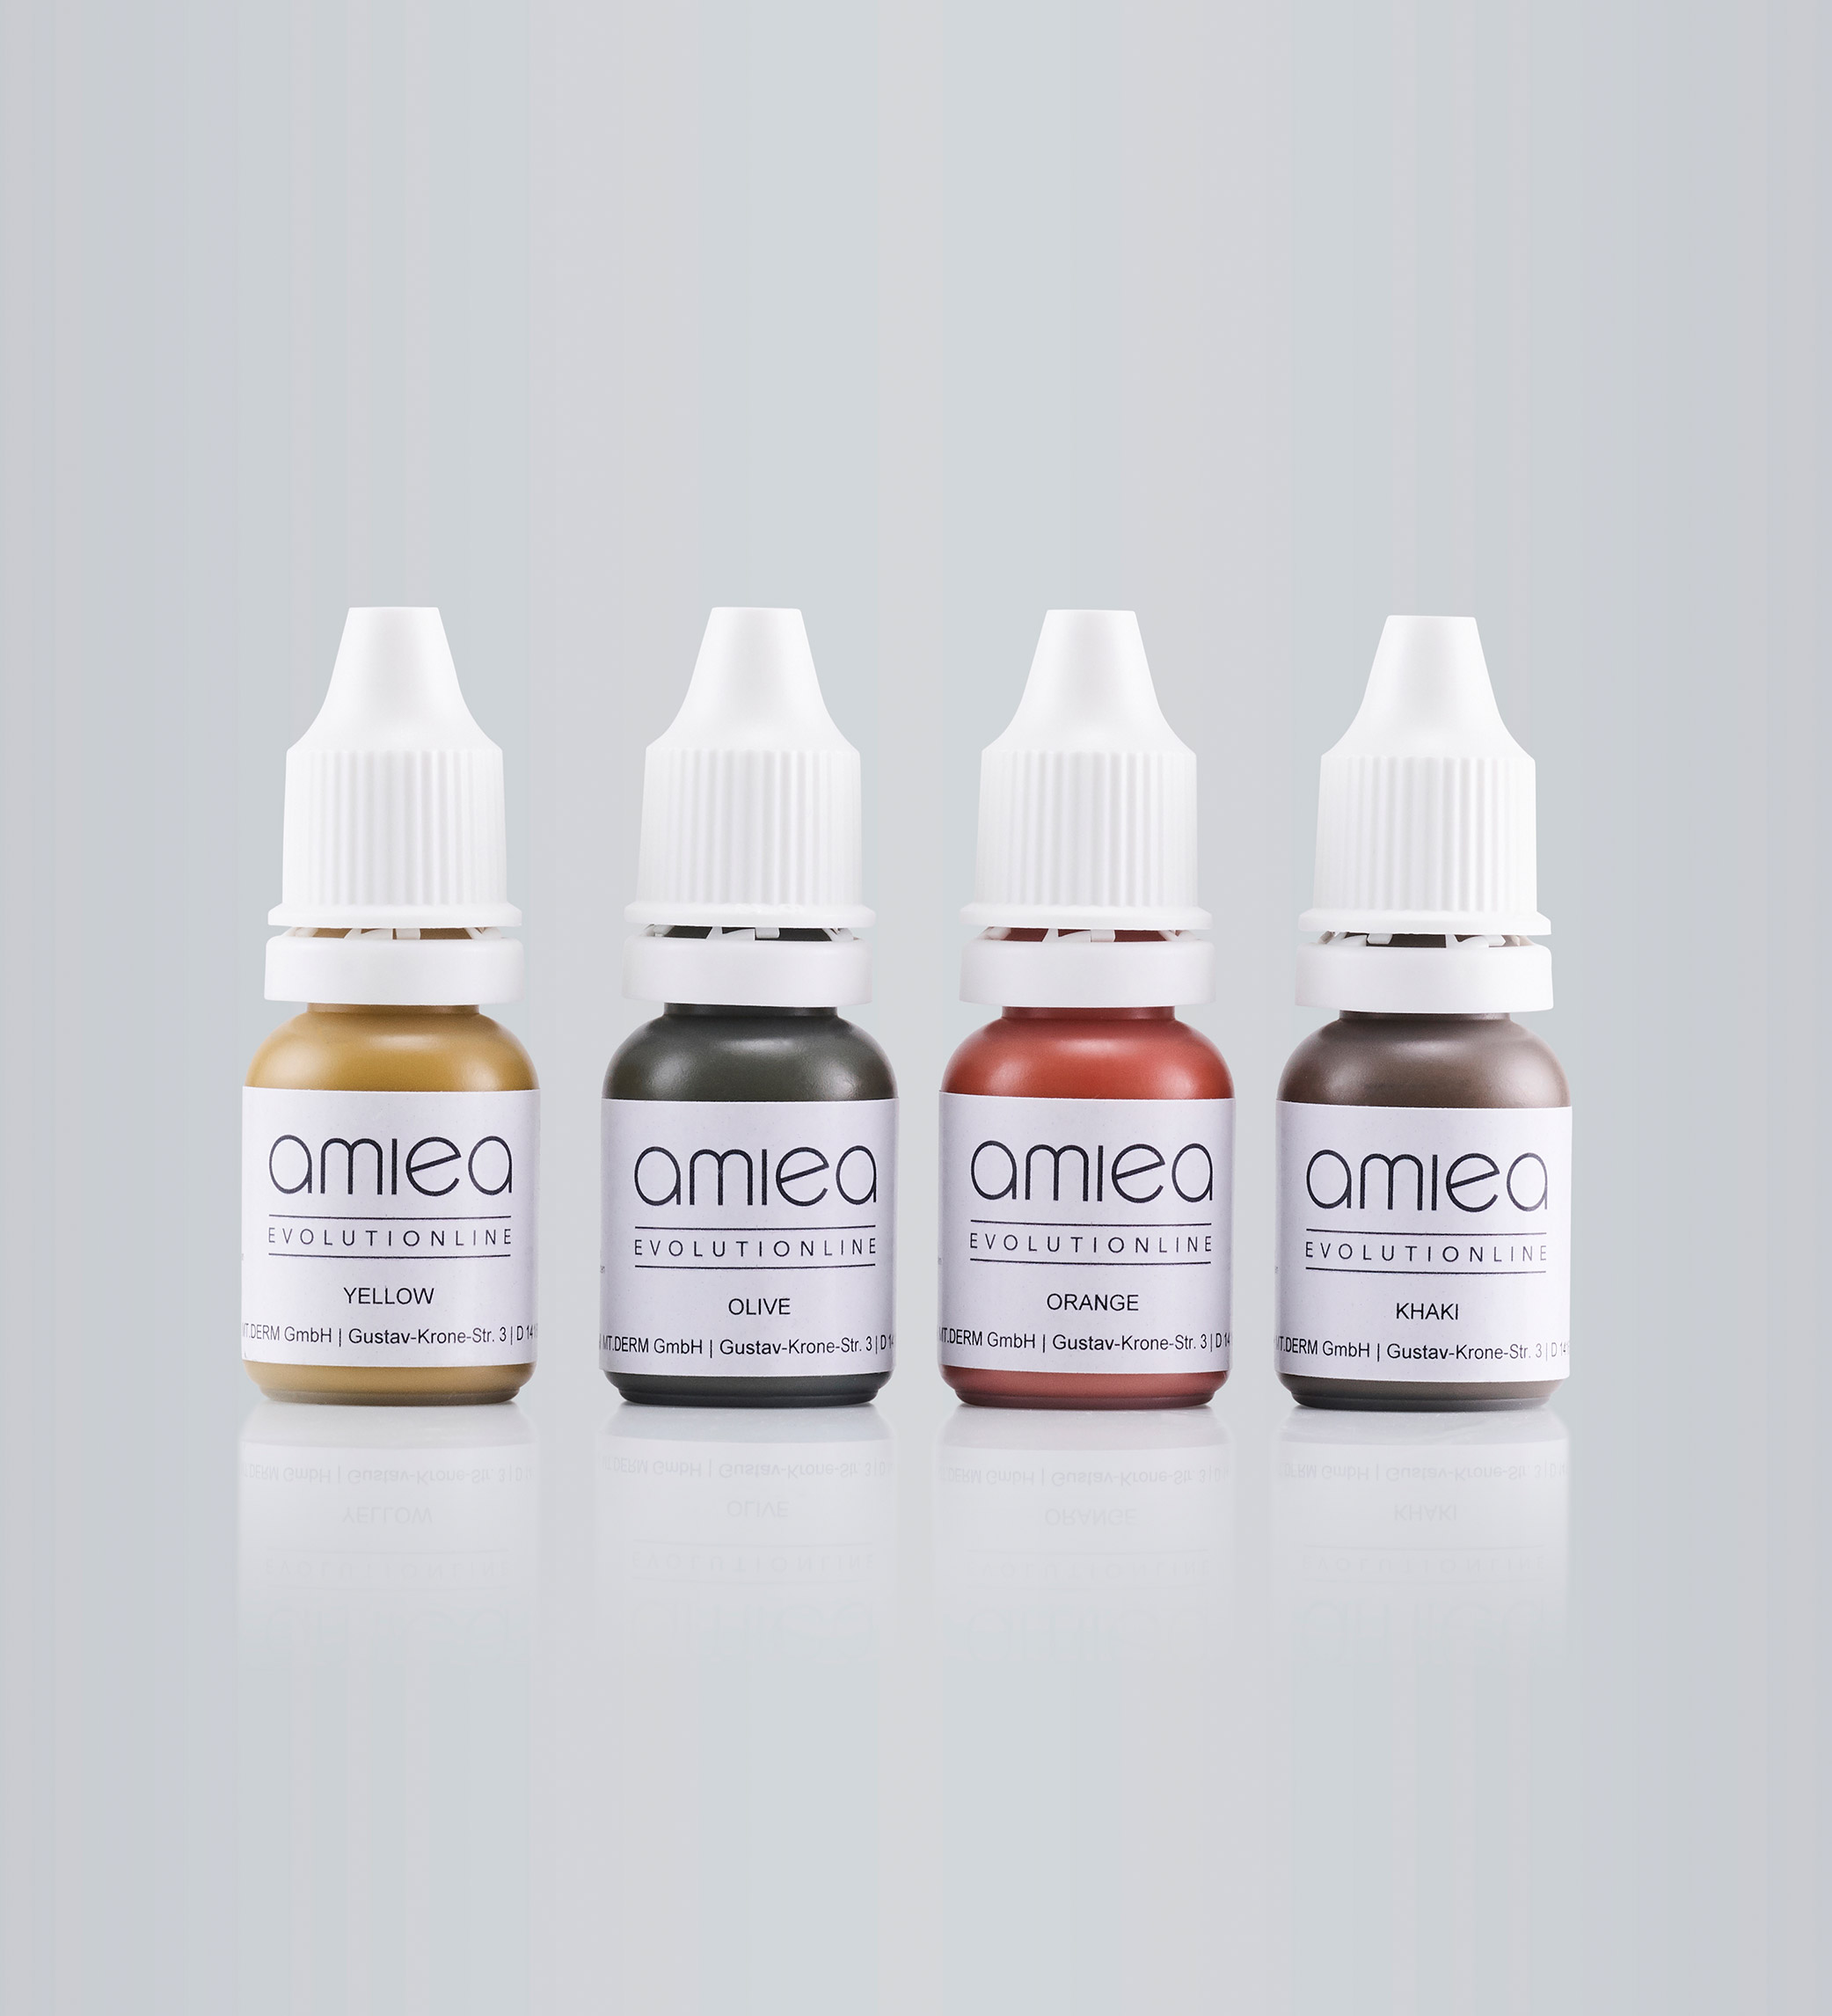 Four bottles with PMU colors of amiea Evolutionline